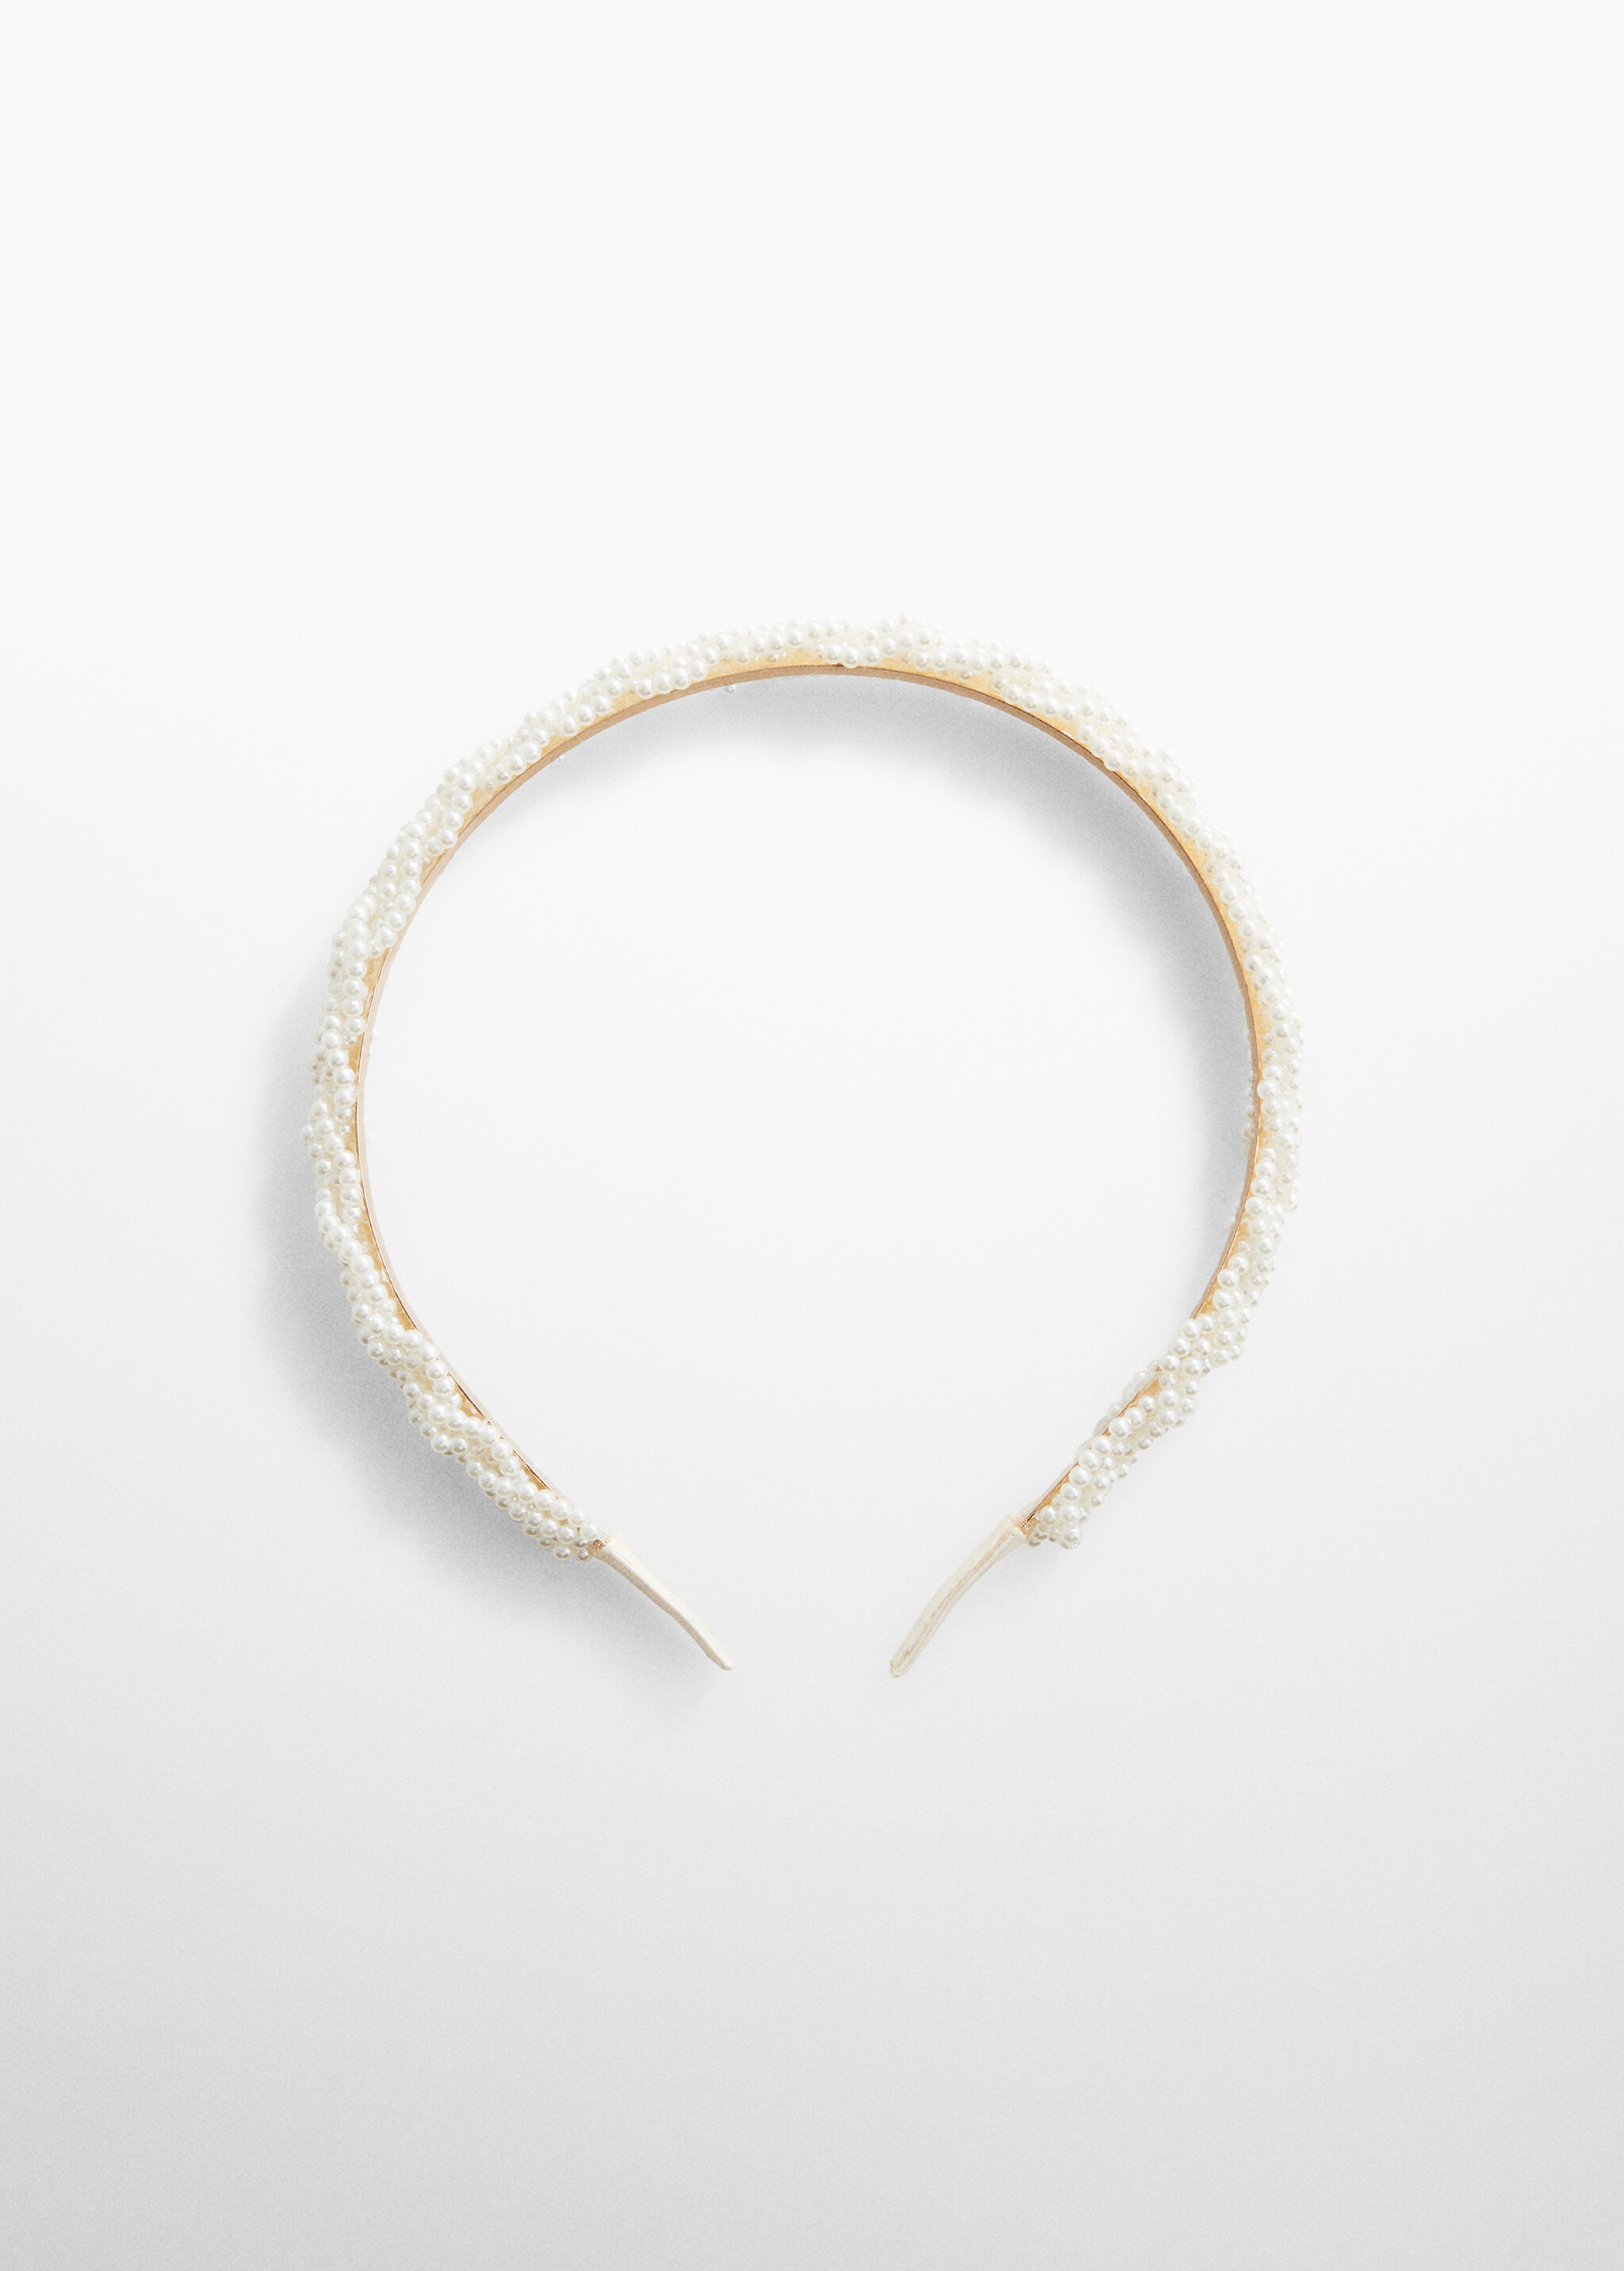 Pearl hairband - Article without model